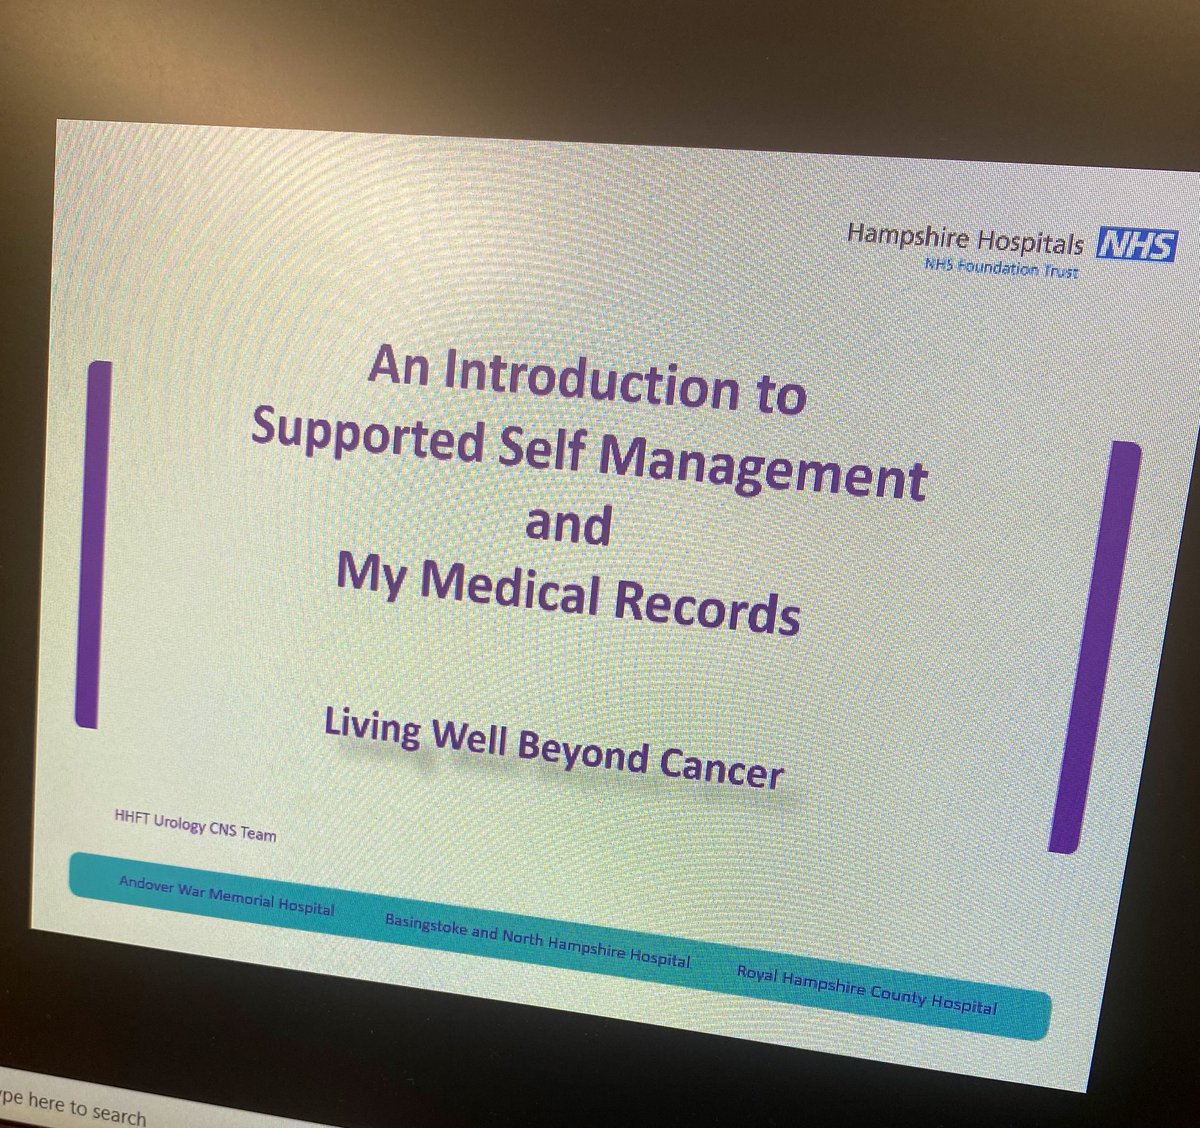 Urology are LIVE with our first virtual patient workshop for Supported Self Management 🥳🤩#mymedicalrecords #supportedselfmanagement #prostatecancercare #personalisedcare